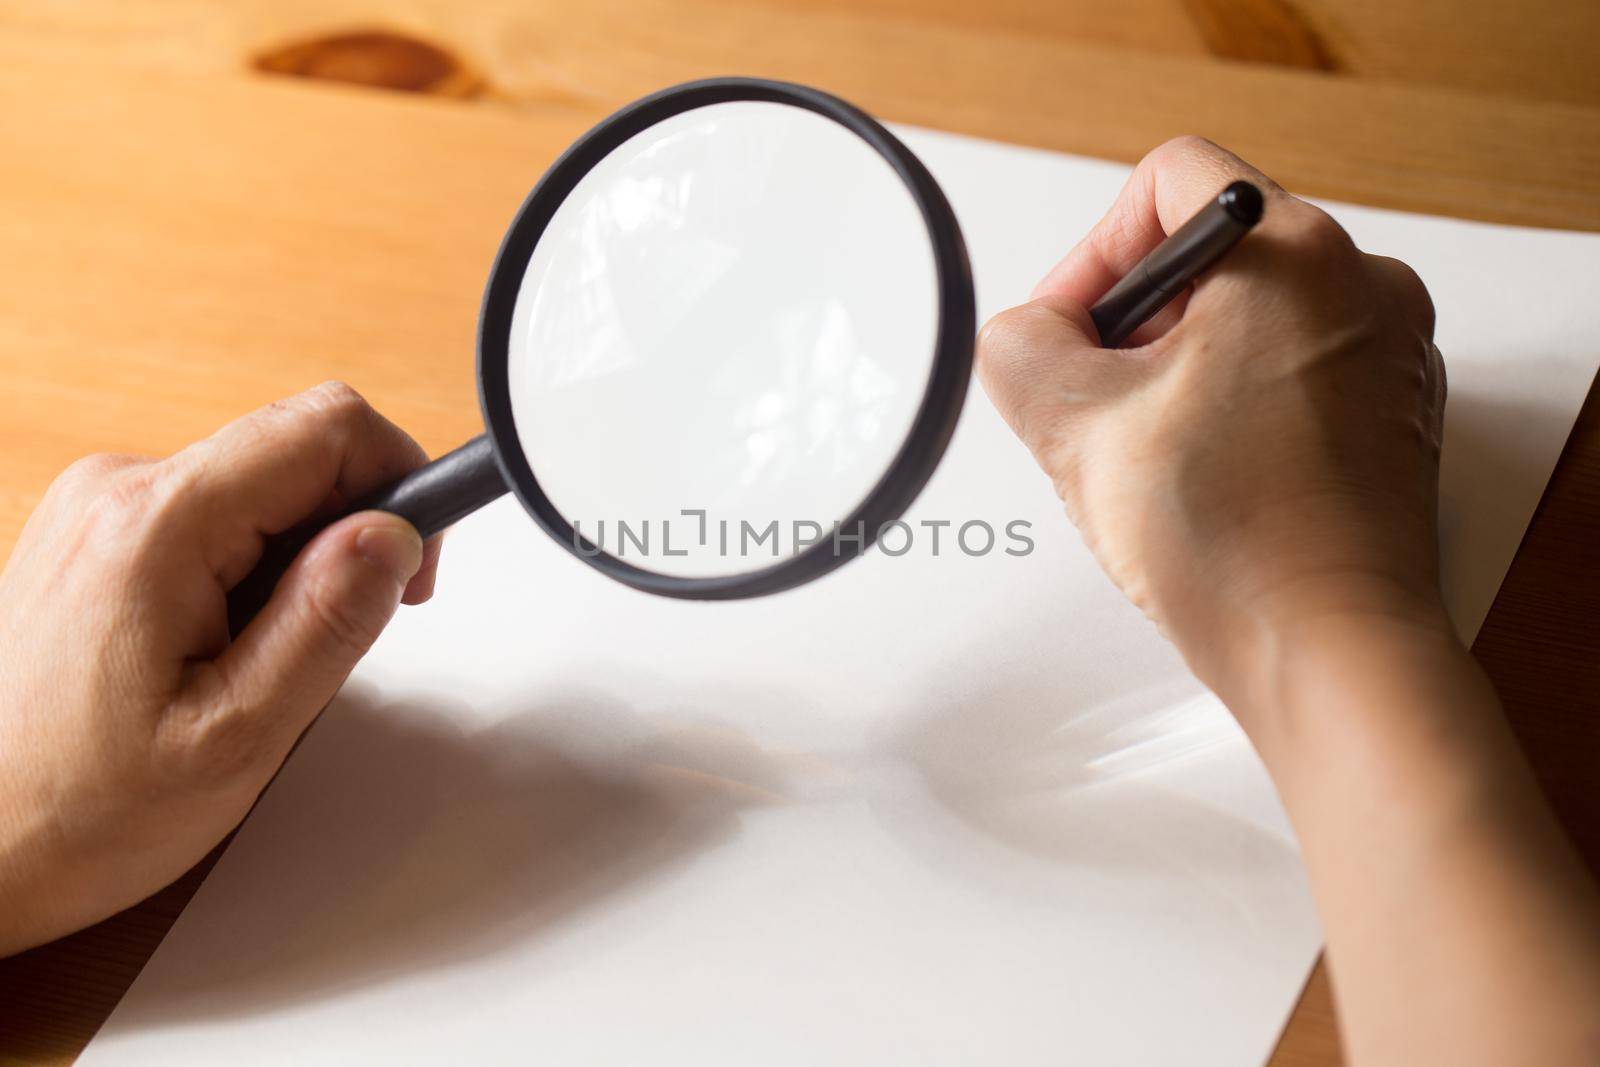 very aged person is writing on a paper with Magnifier